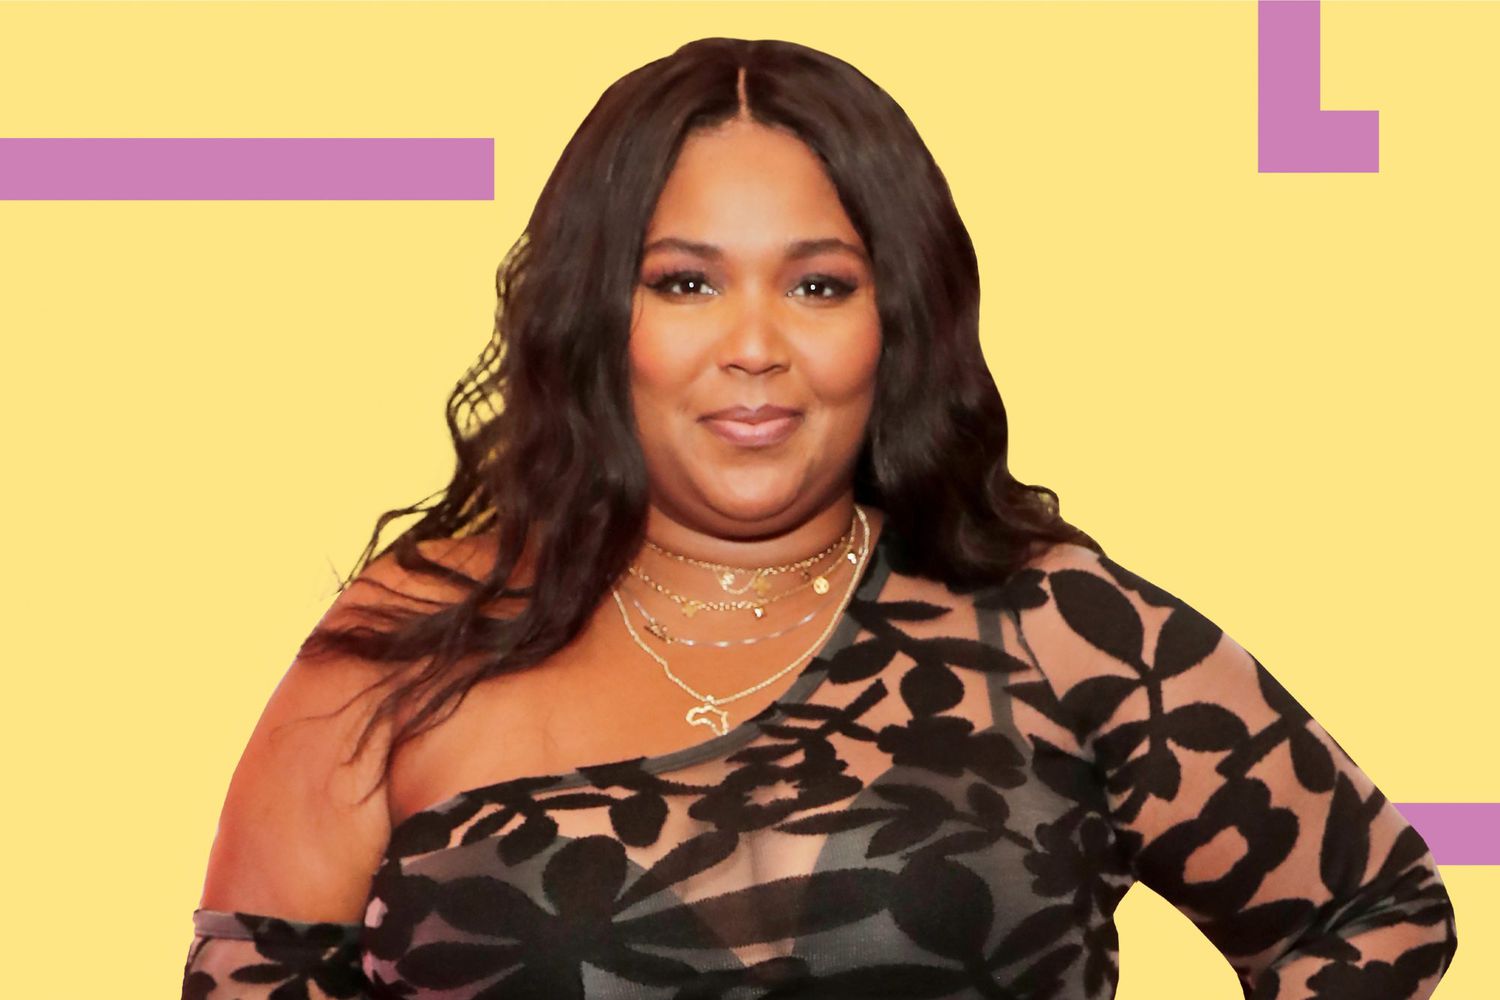 Lizzo-Fat-Girl-TikTok-GettyImages-1201732740